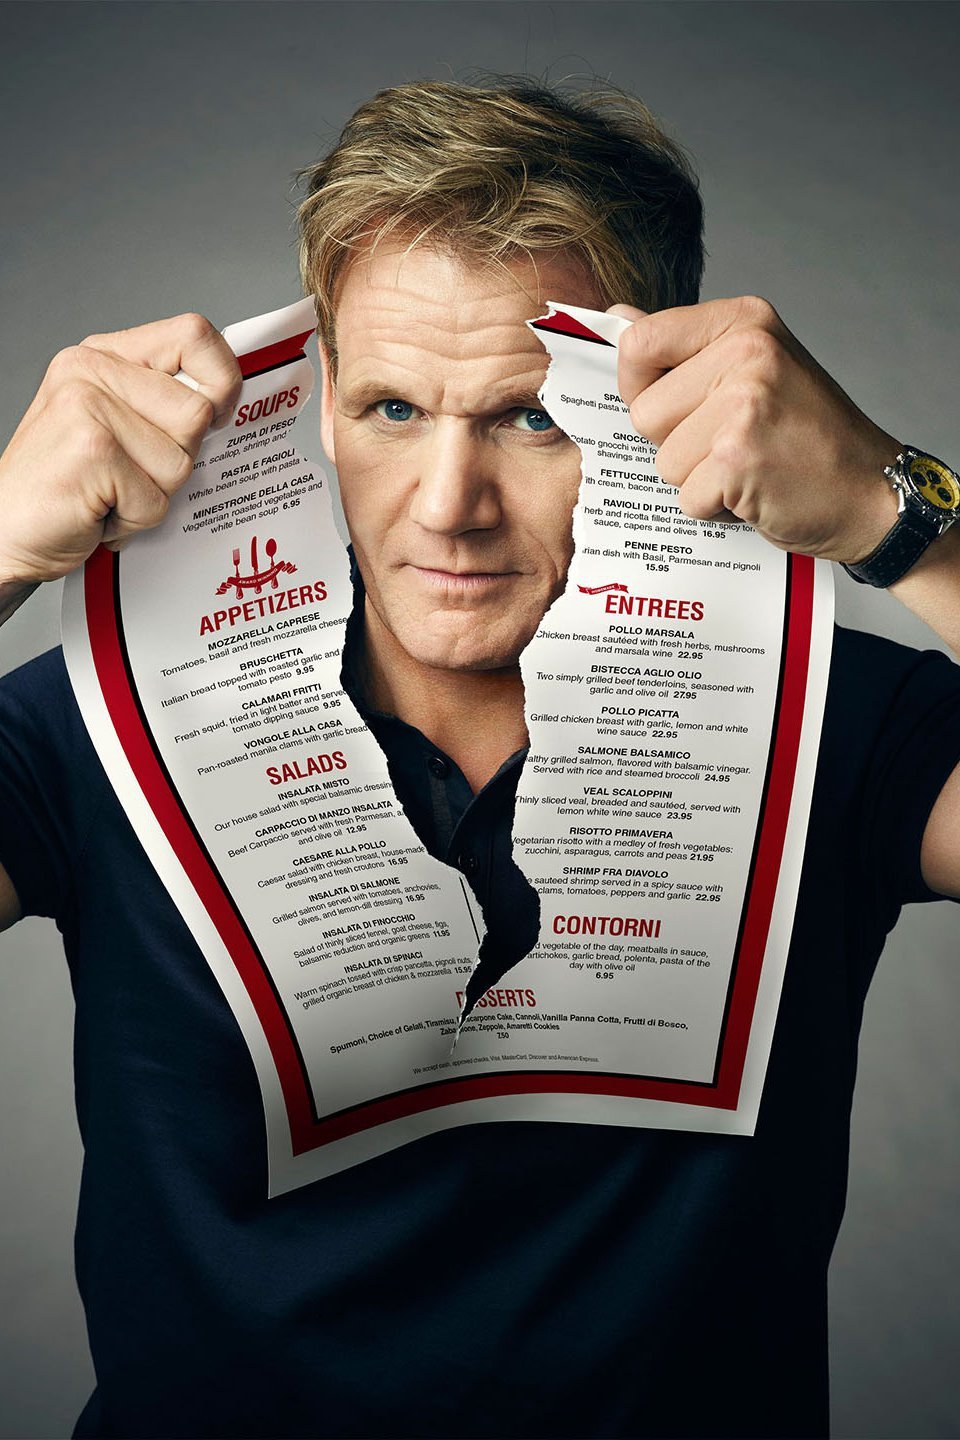 Kitchen Nightmares Season 2 Episodes Streaming Online for Free The